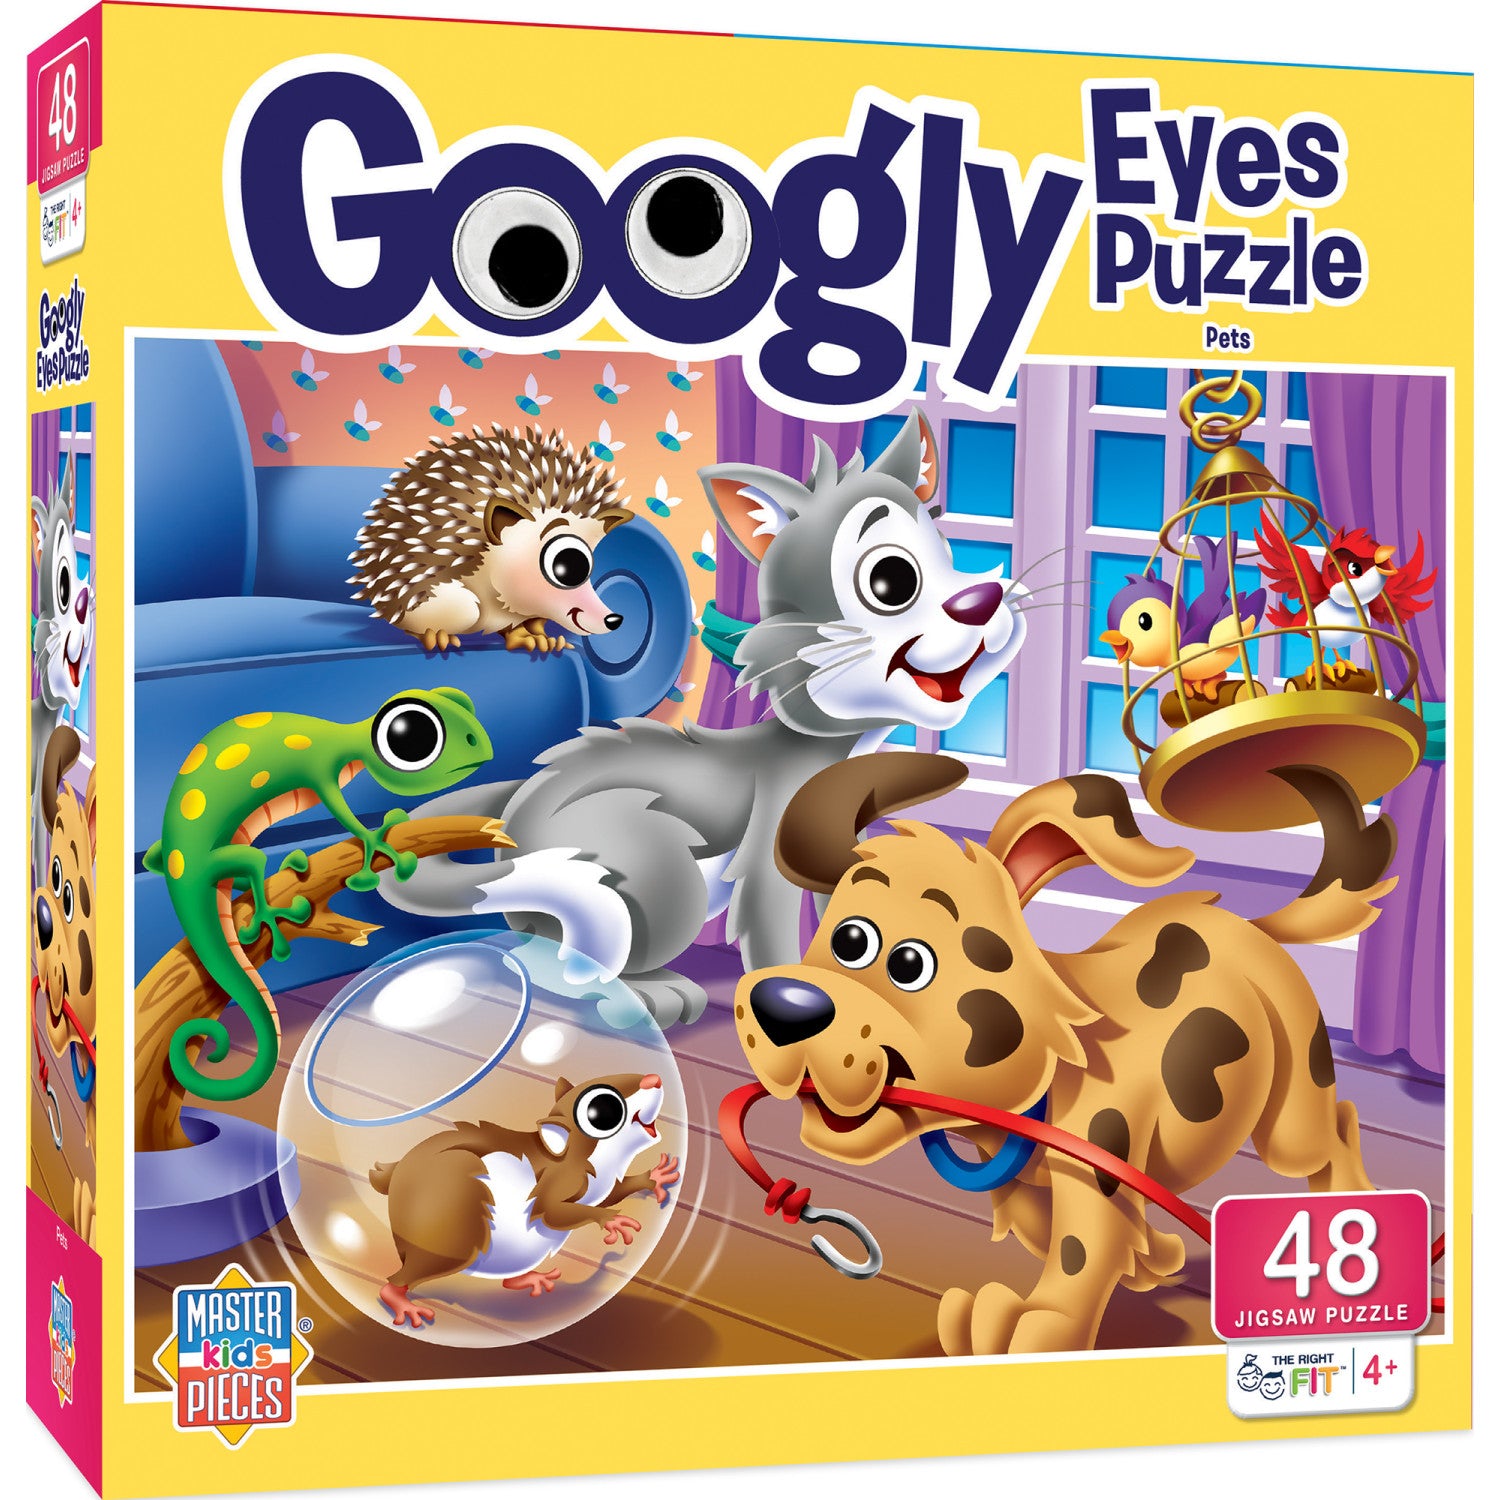 Googly Eyes - Pets 48 Piece Jigsaw Puzzle